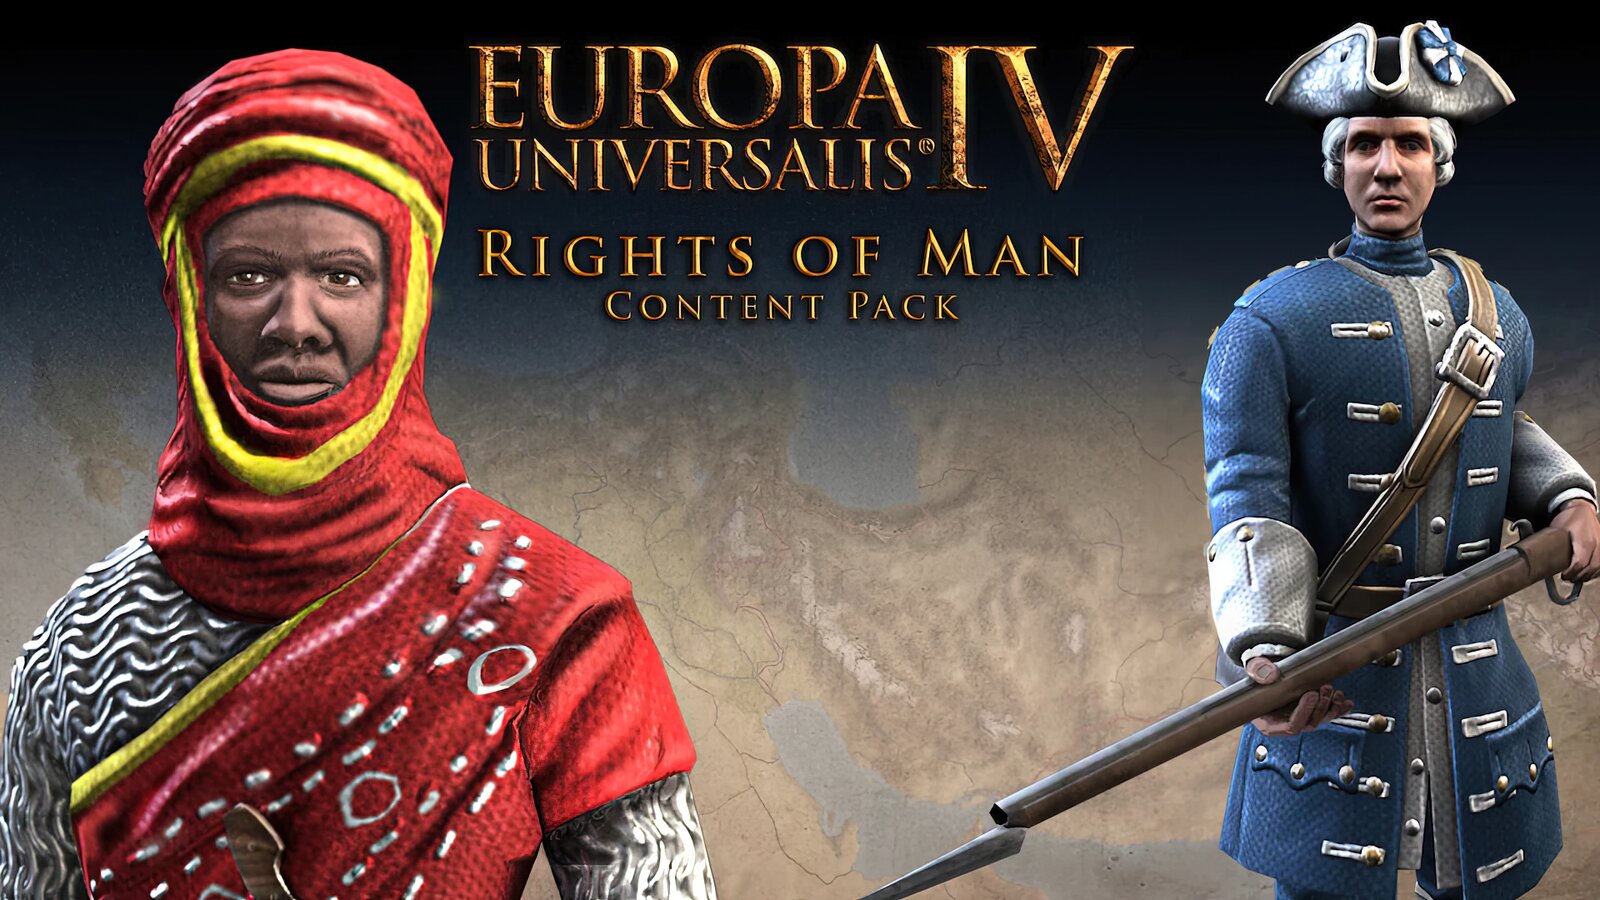 Europa Universalis IV - Rights of Man Content Pack